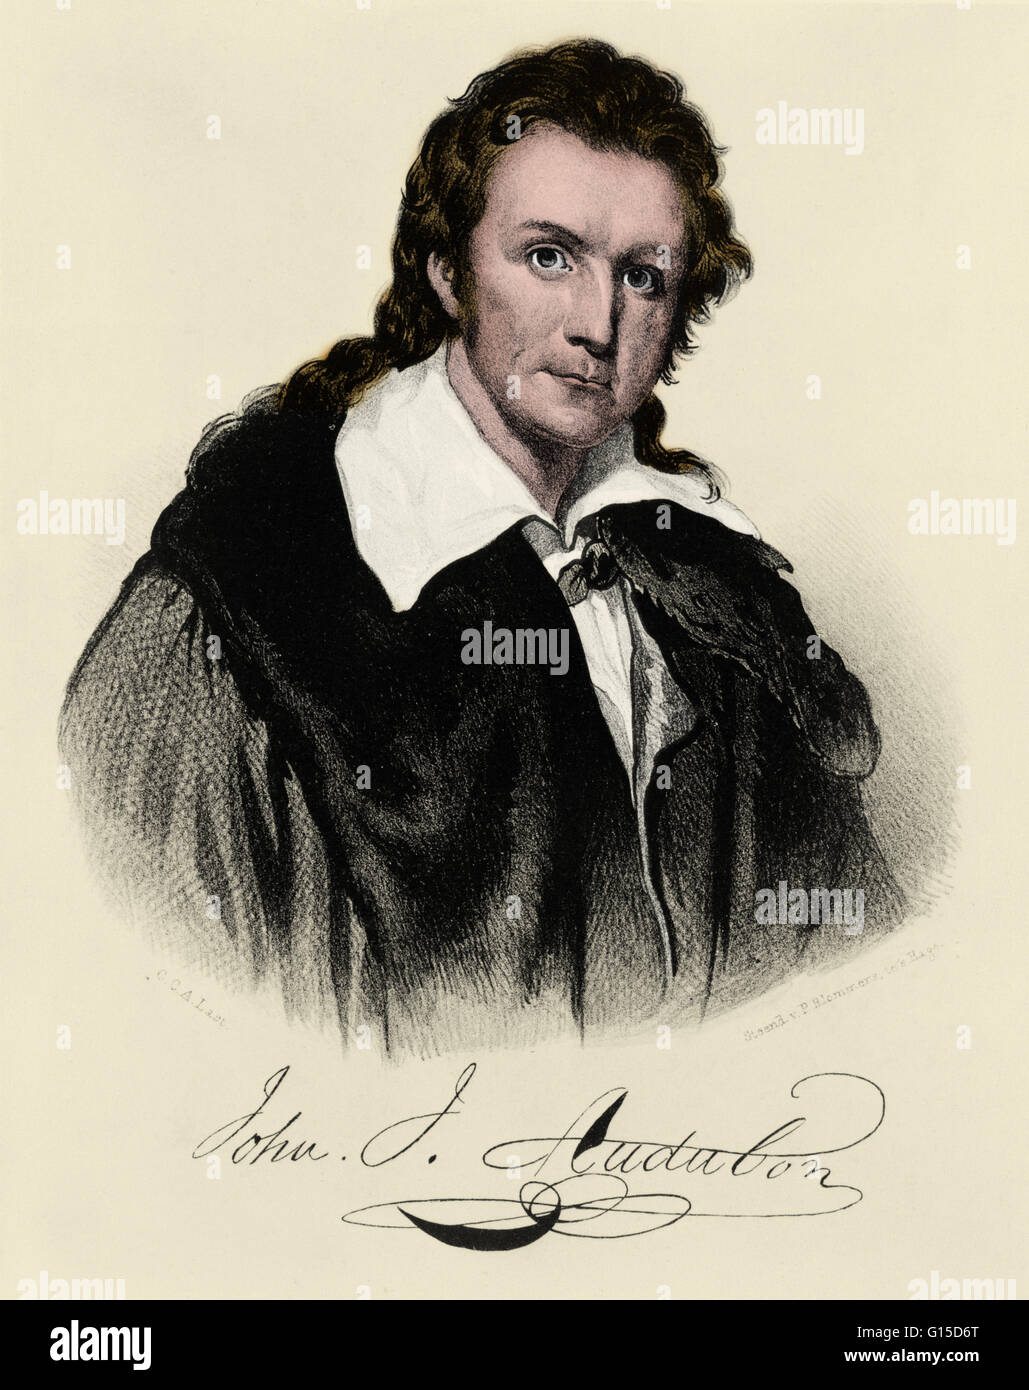 John James Audubon. This rare engraving by C. Turner, A.R.A was copied from the miniature painted by Frederick Cruickshank, about 1831. Published for the engraver by Robert Havell, London, 1835. John James Audubon (Jean-Jacques Audubon) (1785-1851) was a Stock Photo